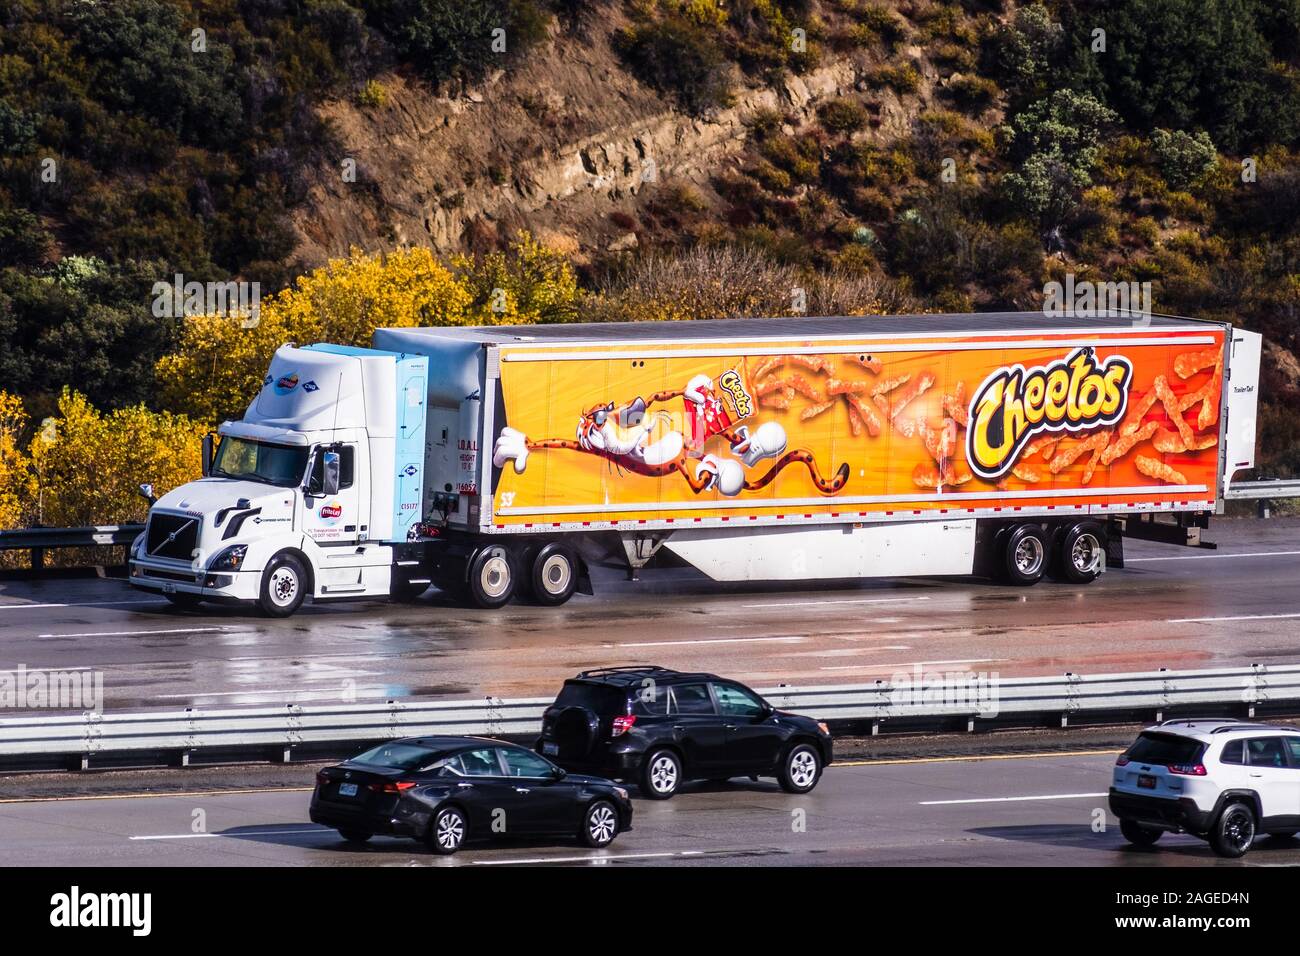 Dec 8, 2019 Los Angeles / CA / USA - Cheetos branded truck driving on the freeway; Cheetos is a brand of cheese-flavored puffed cornmeal snacks made b Stock Photo